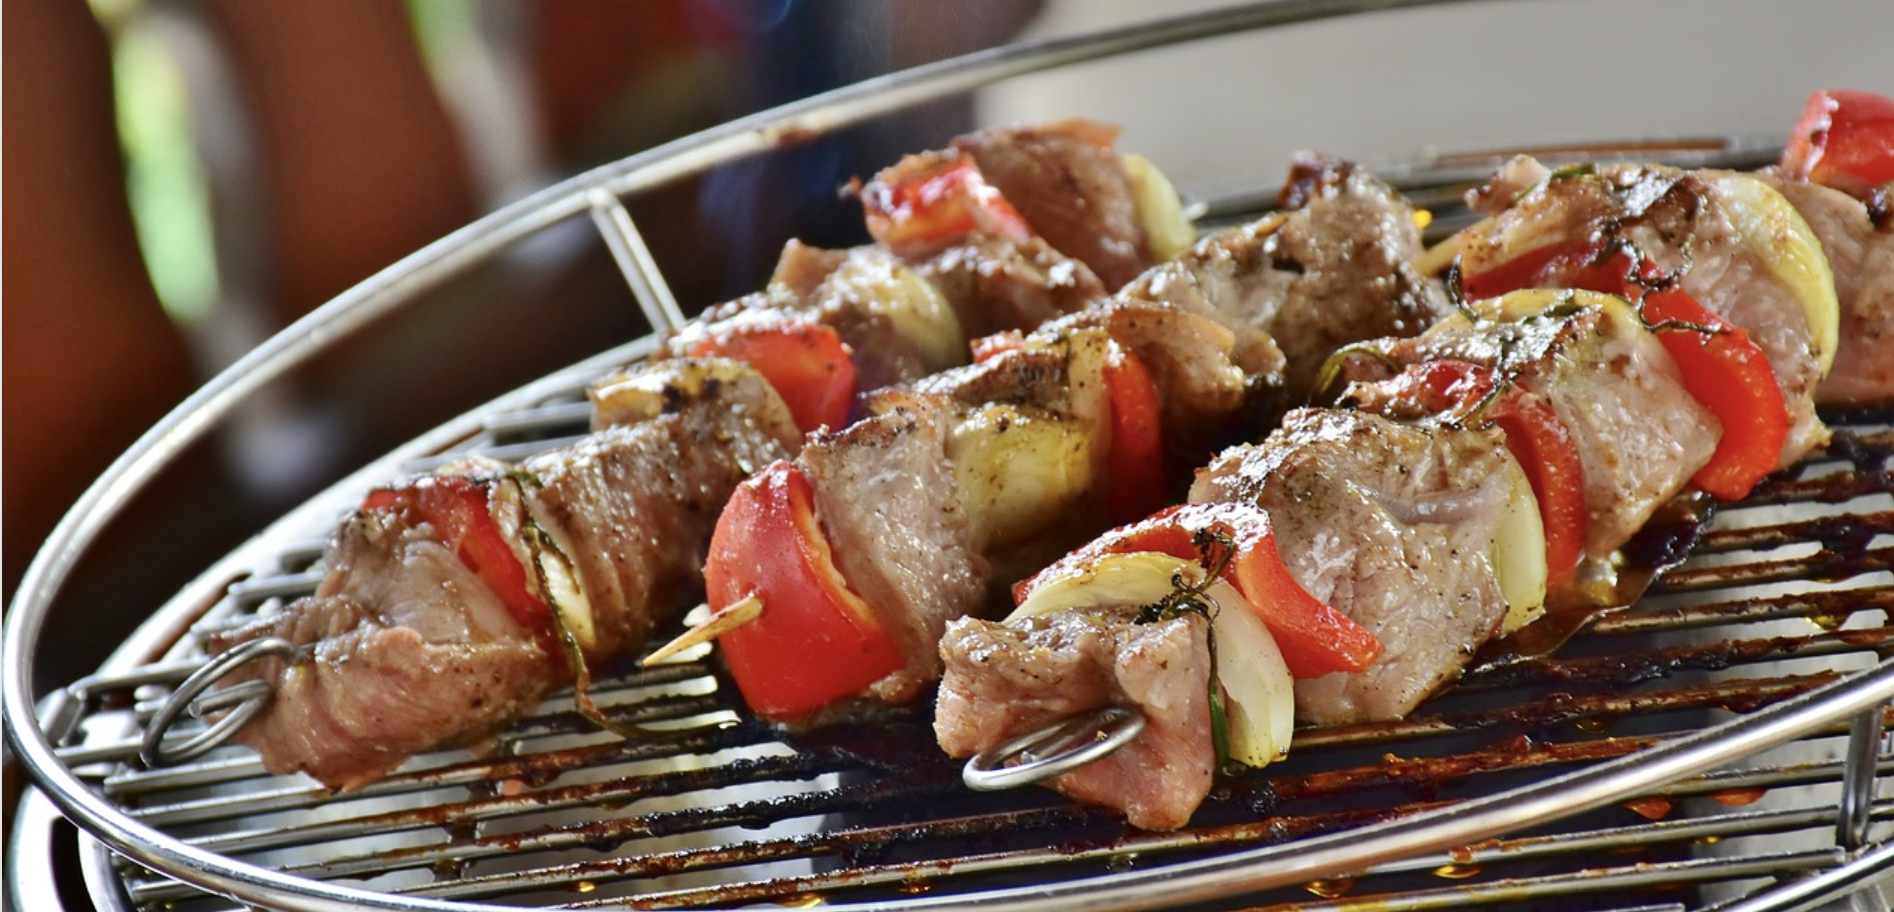 How To Cook Shish Kabobs On A Gas Grill?